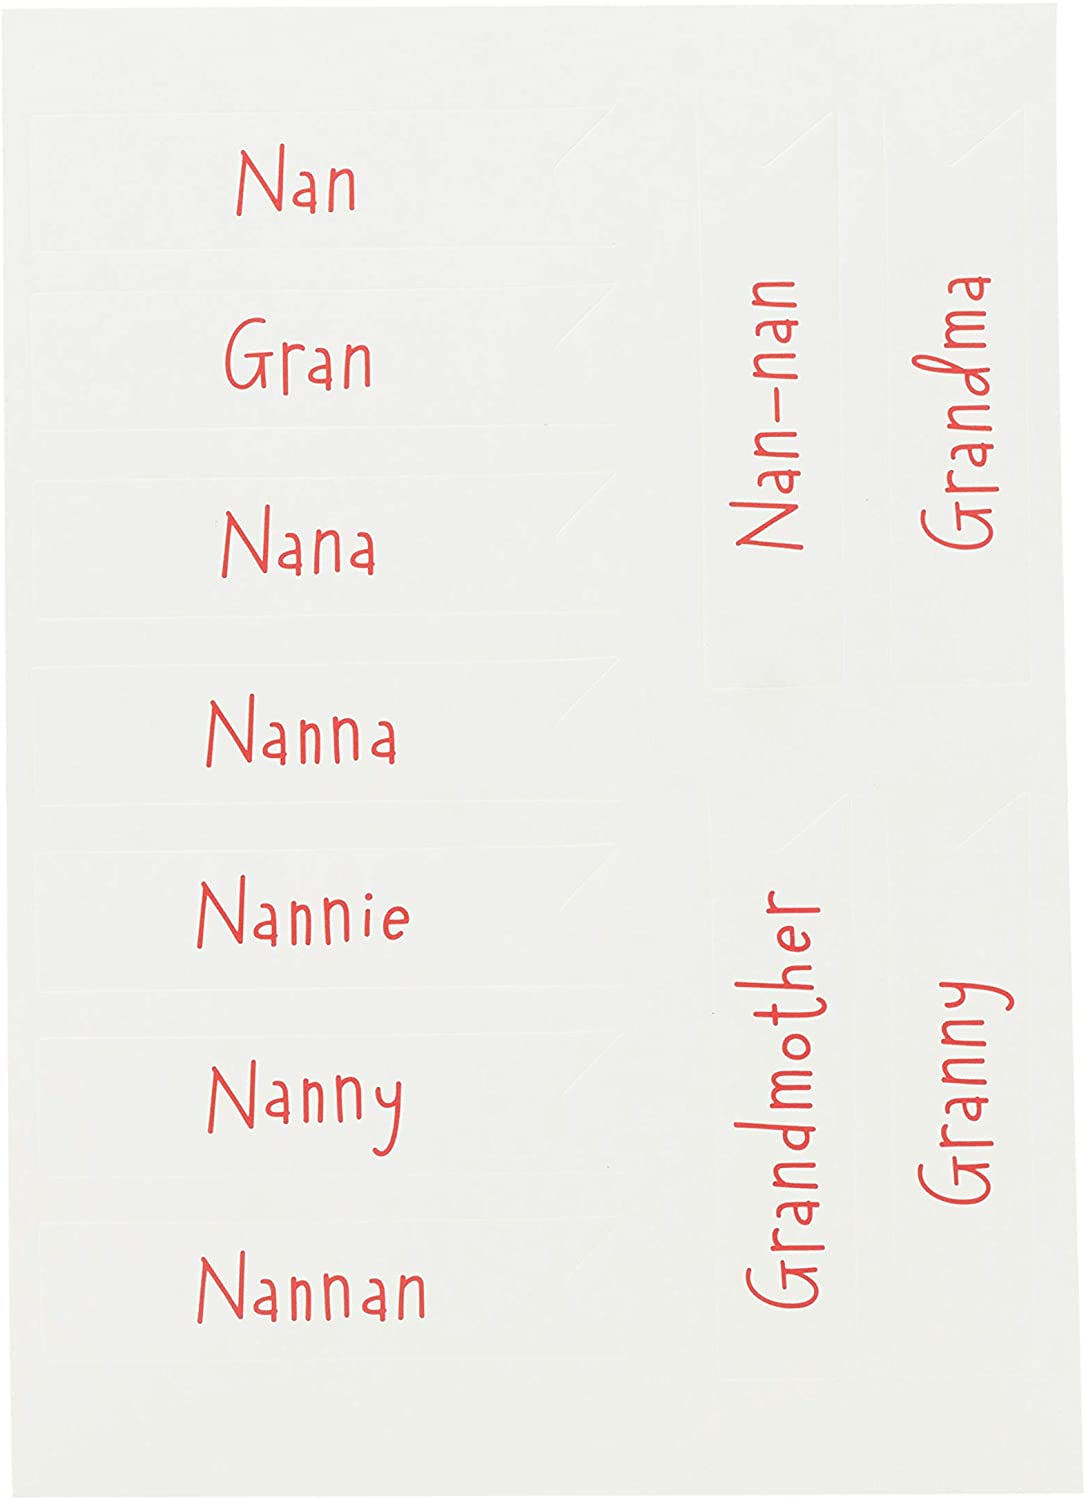 To A Special Nan Personalised Name With Sticker Christmas Card 